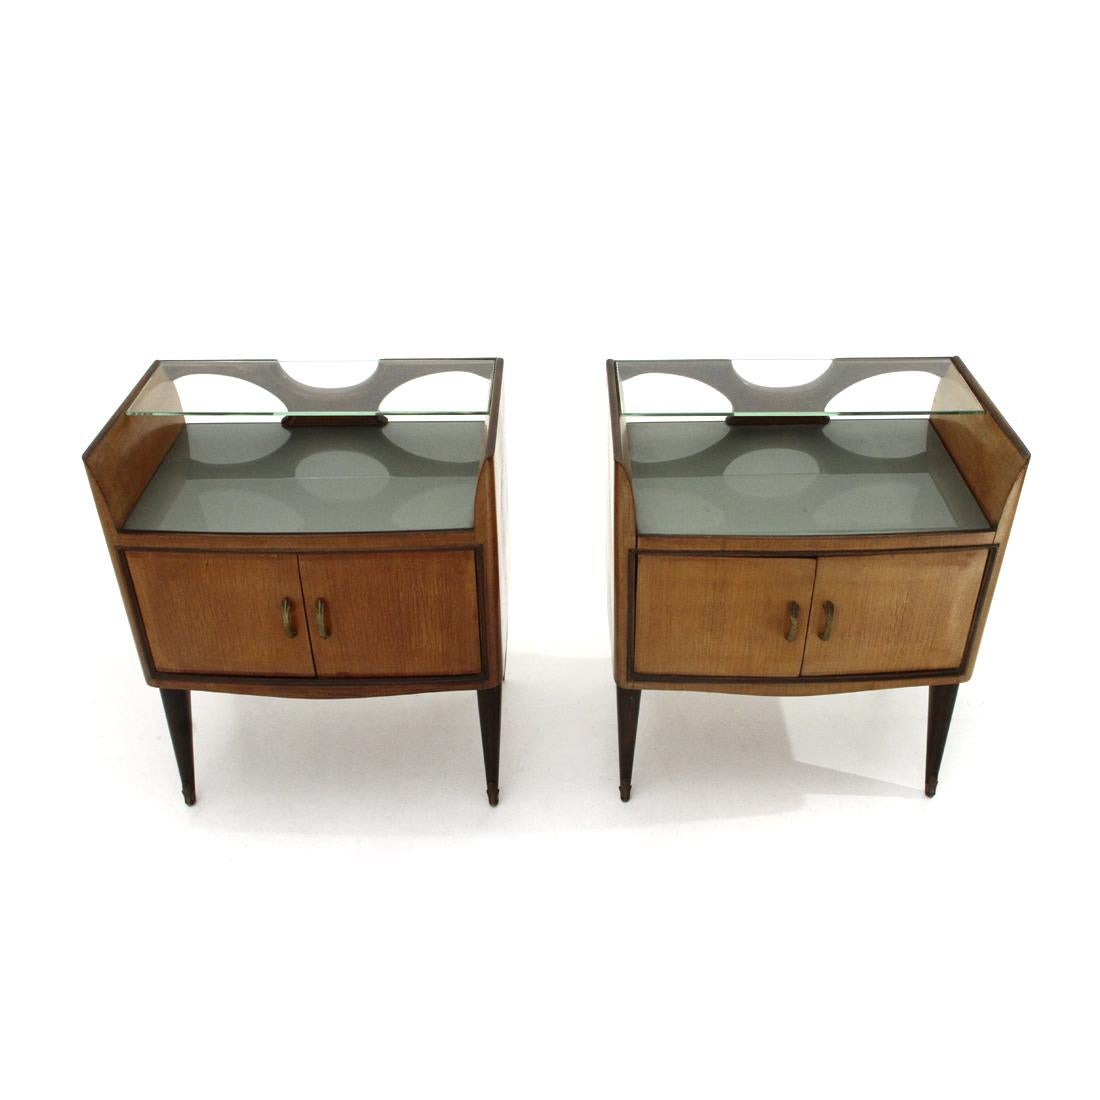 Mid-20th Century Pair of Bedside Tables with Glass Shelf, 1950s